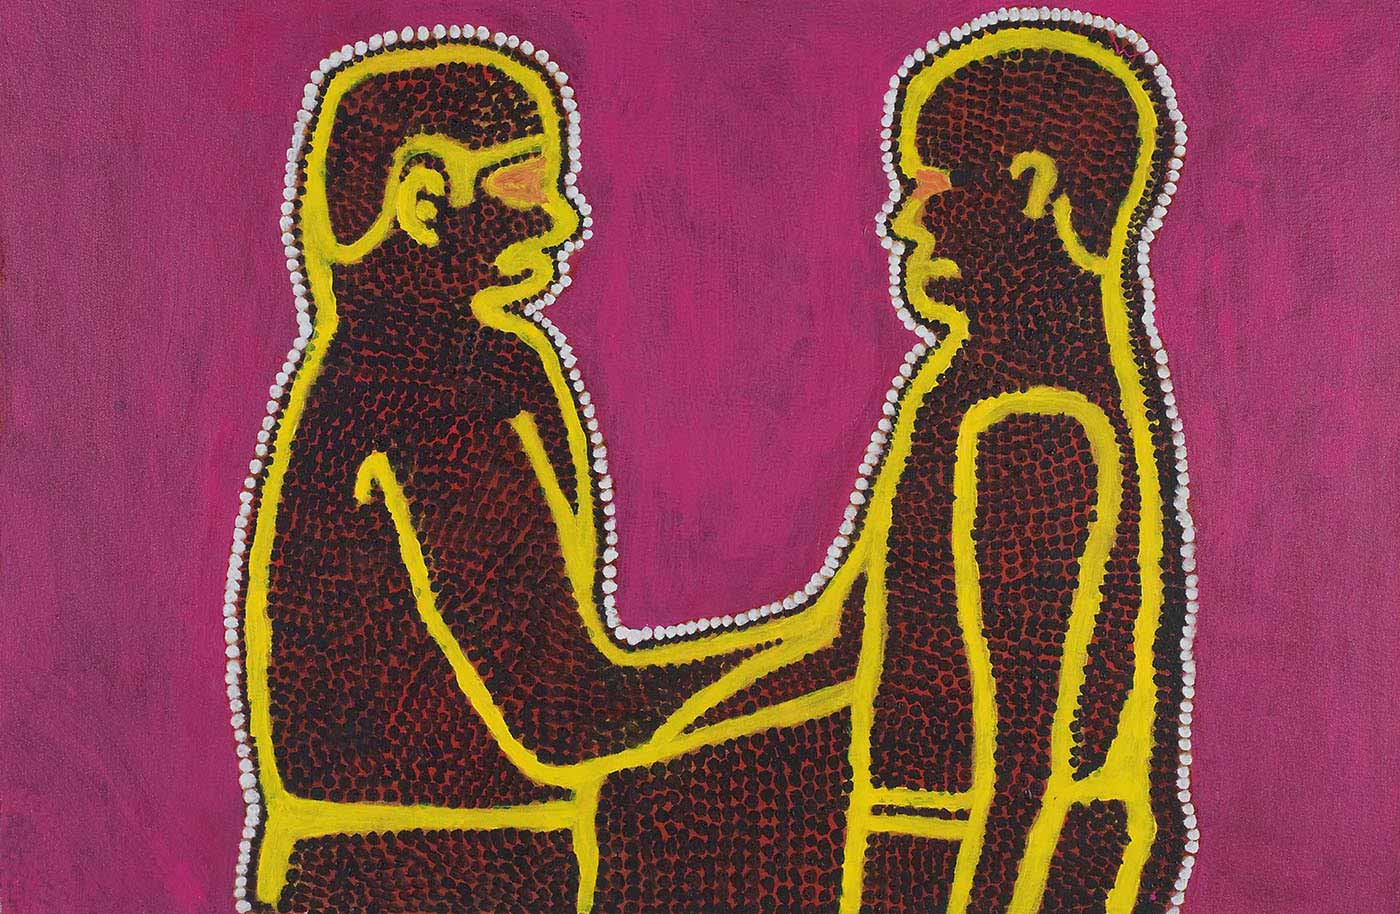 A painting on canvas of two human figures facing each other and joined at the hand or arm. The figures are outlined in yellow and filled with black dots over a pink background, with a white dotted edge around the two figures. The background is a dark pink-purple.  - click to view larger image